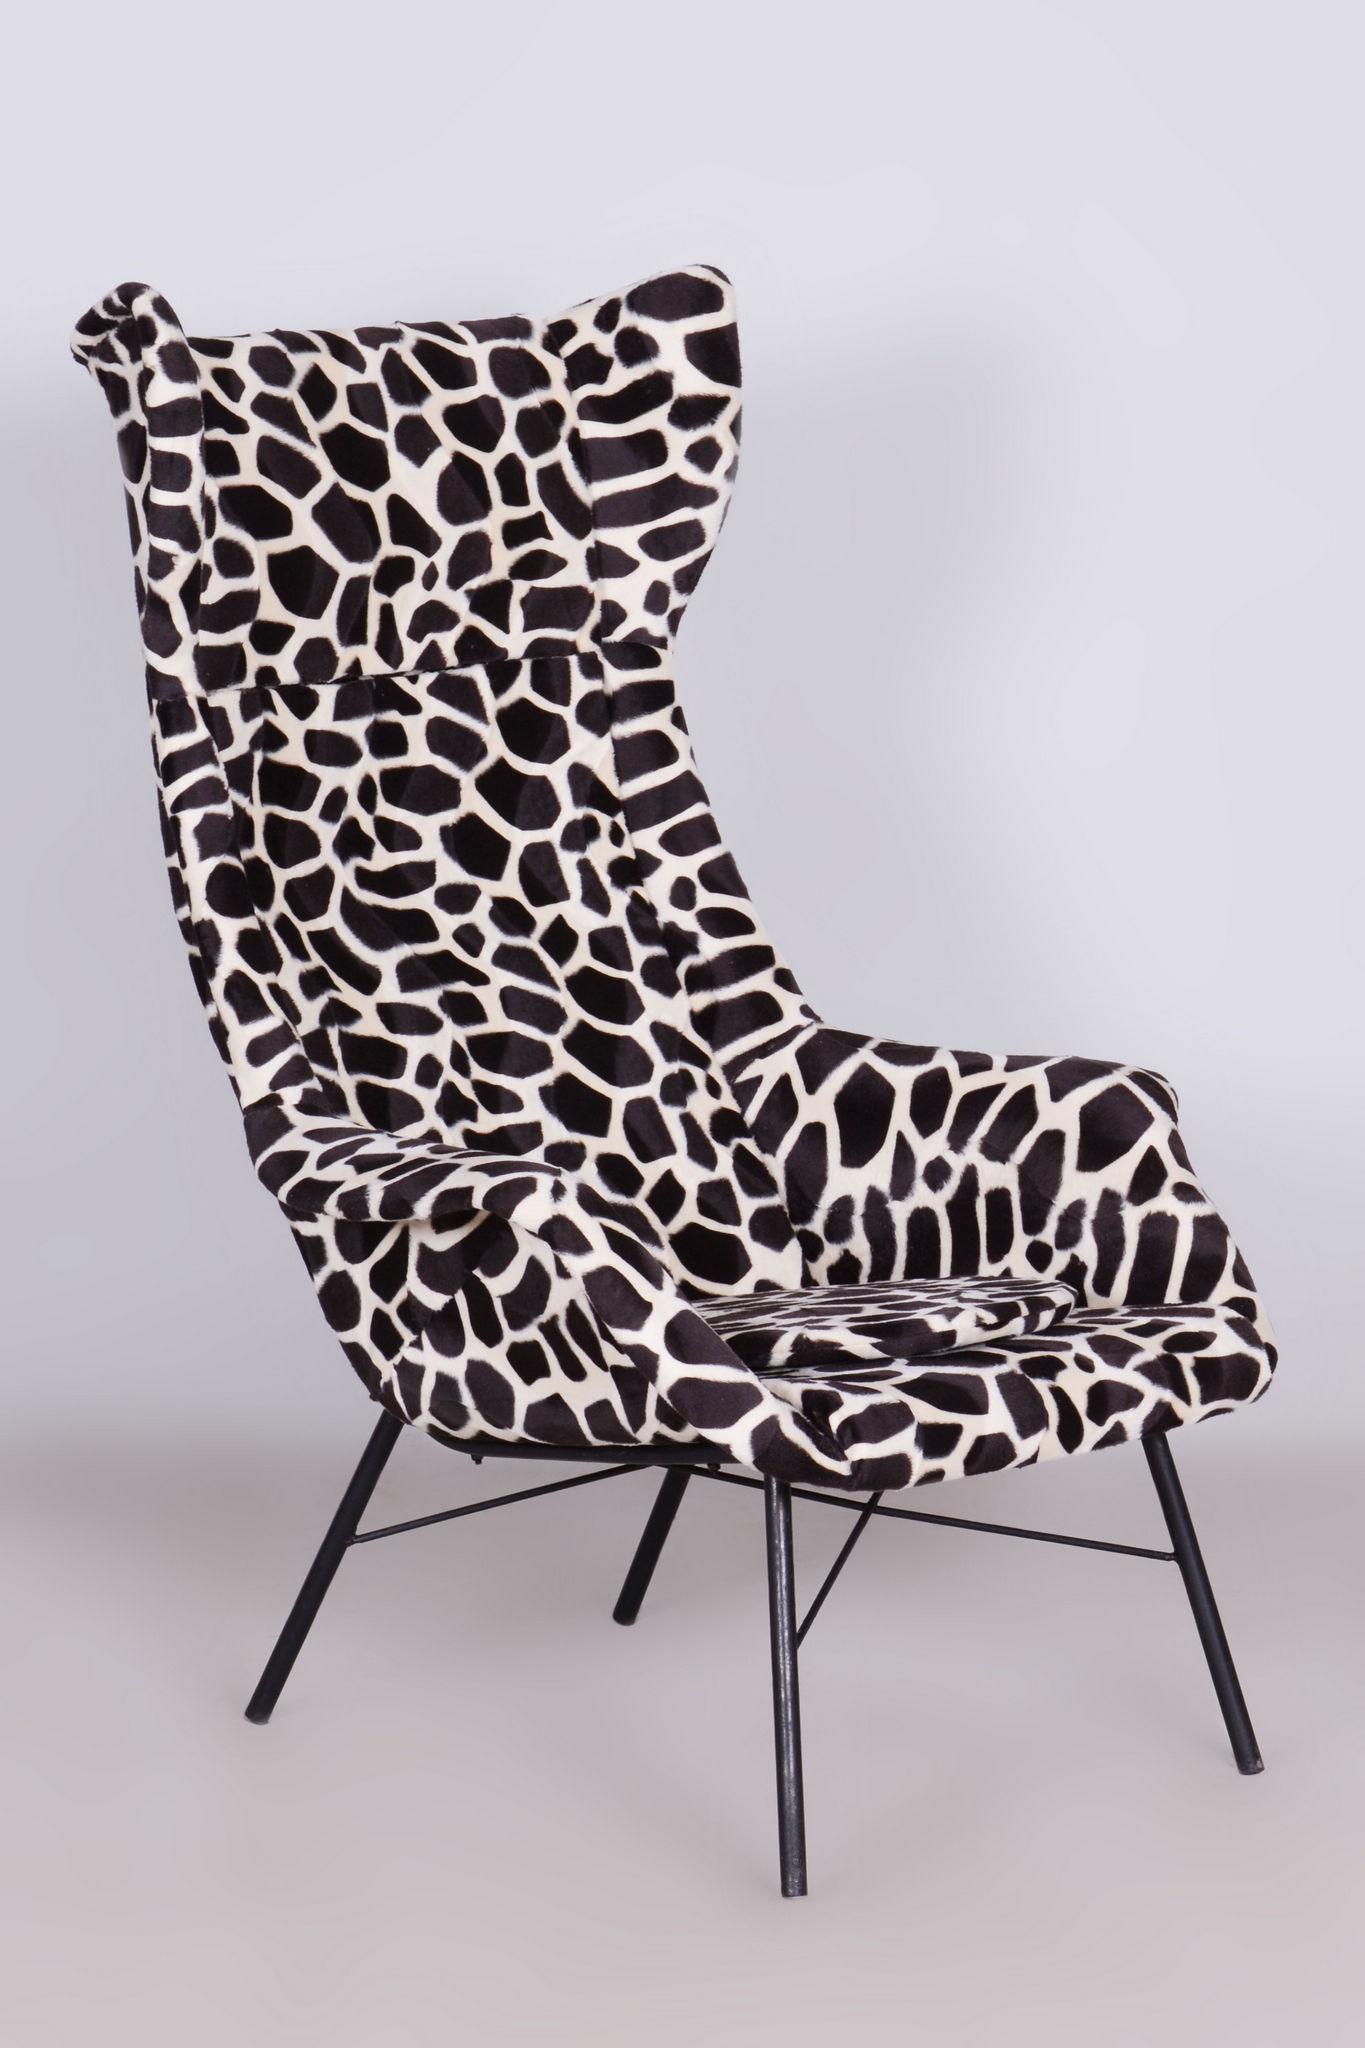 Original midcentury wing chair.

Designer: Miroslav Navratil
Source: Czechia
Period: 1950-1959
Material: Laminat, Tubular construction

New upholstery in cover fabric with imitation giraffe fur.
According to the original process, our professional